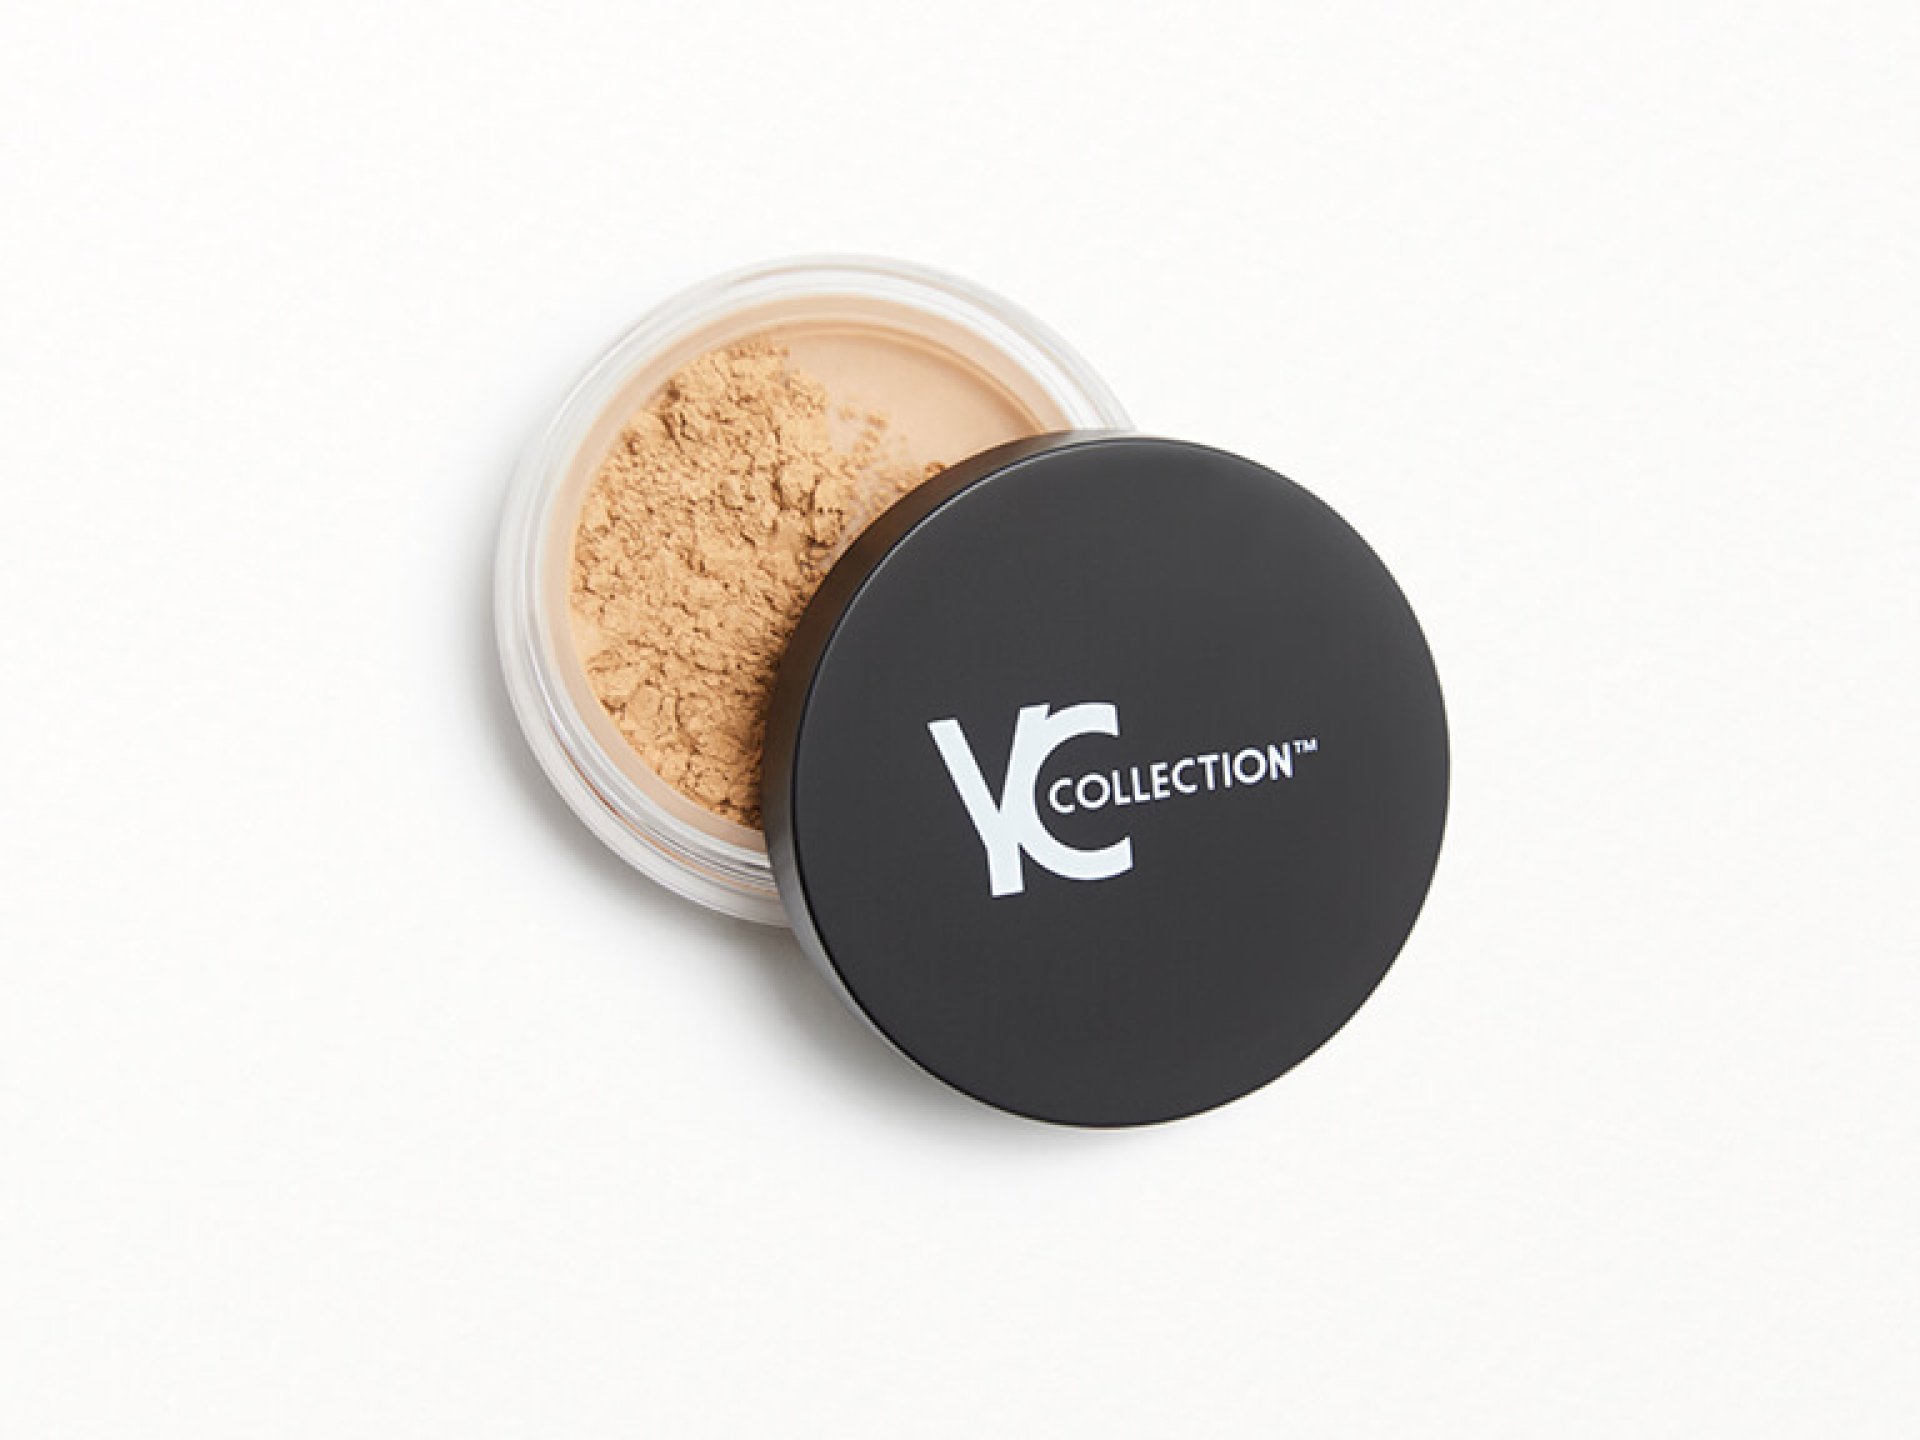 YC COLLECTION Loose Setting Powder in #215